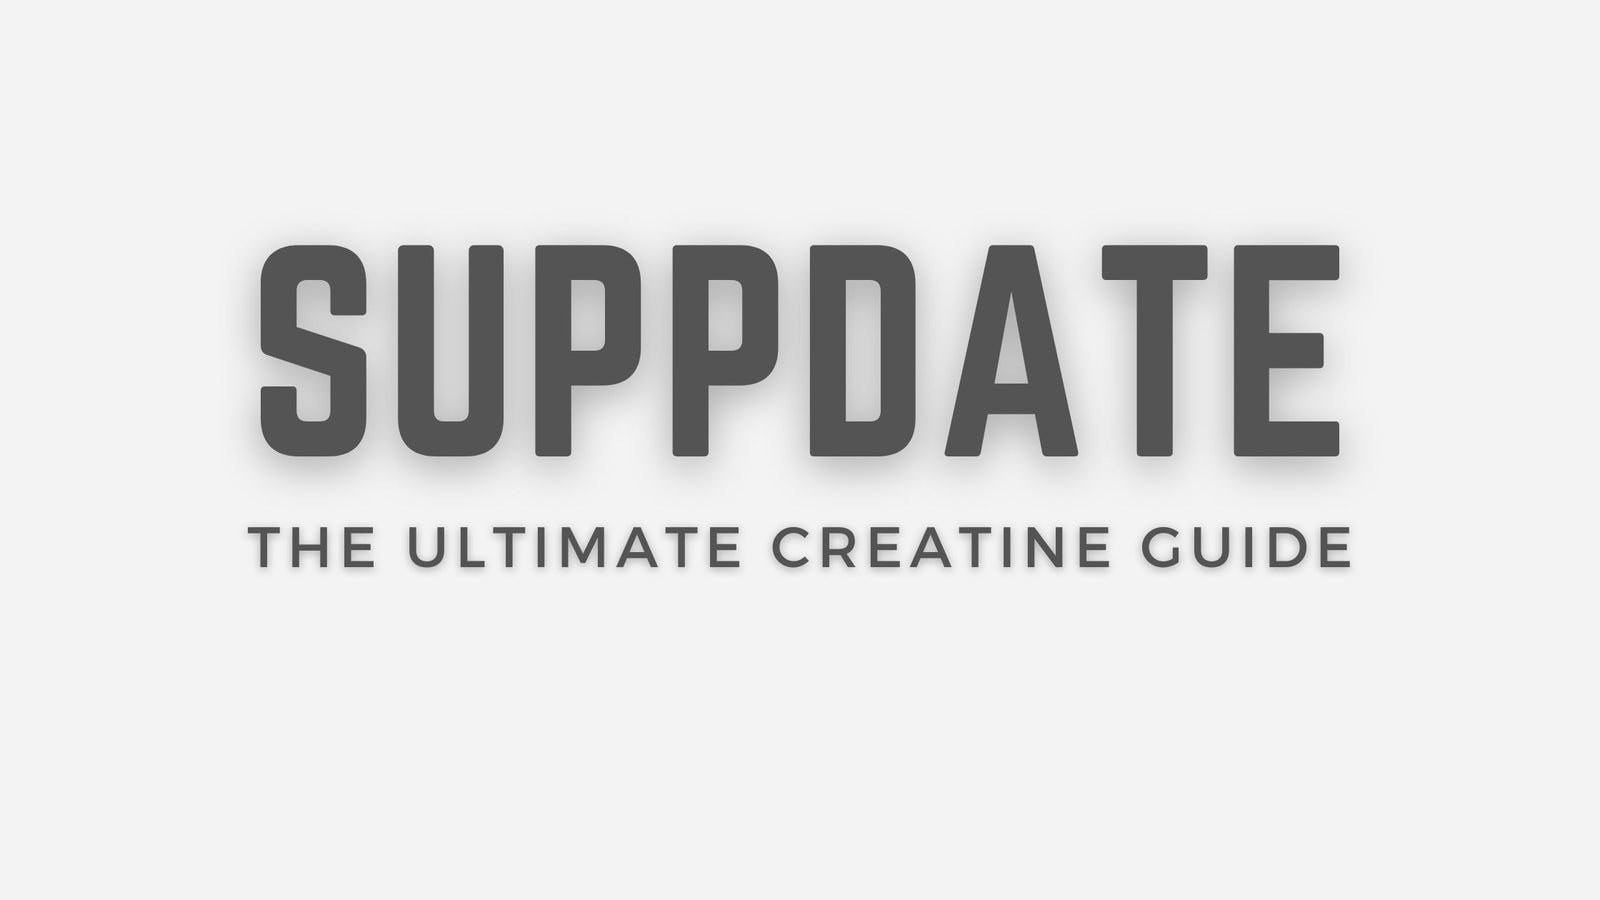 The Ultimate Creatine Guide